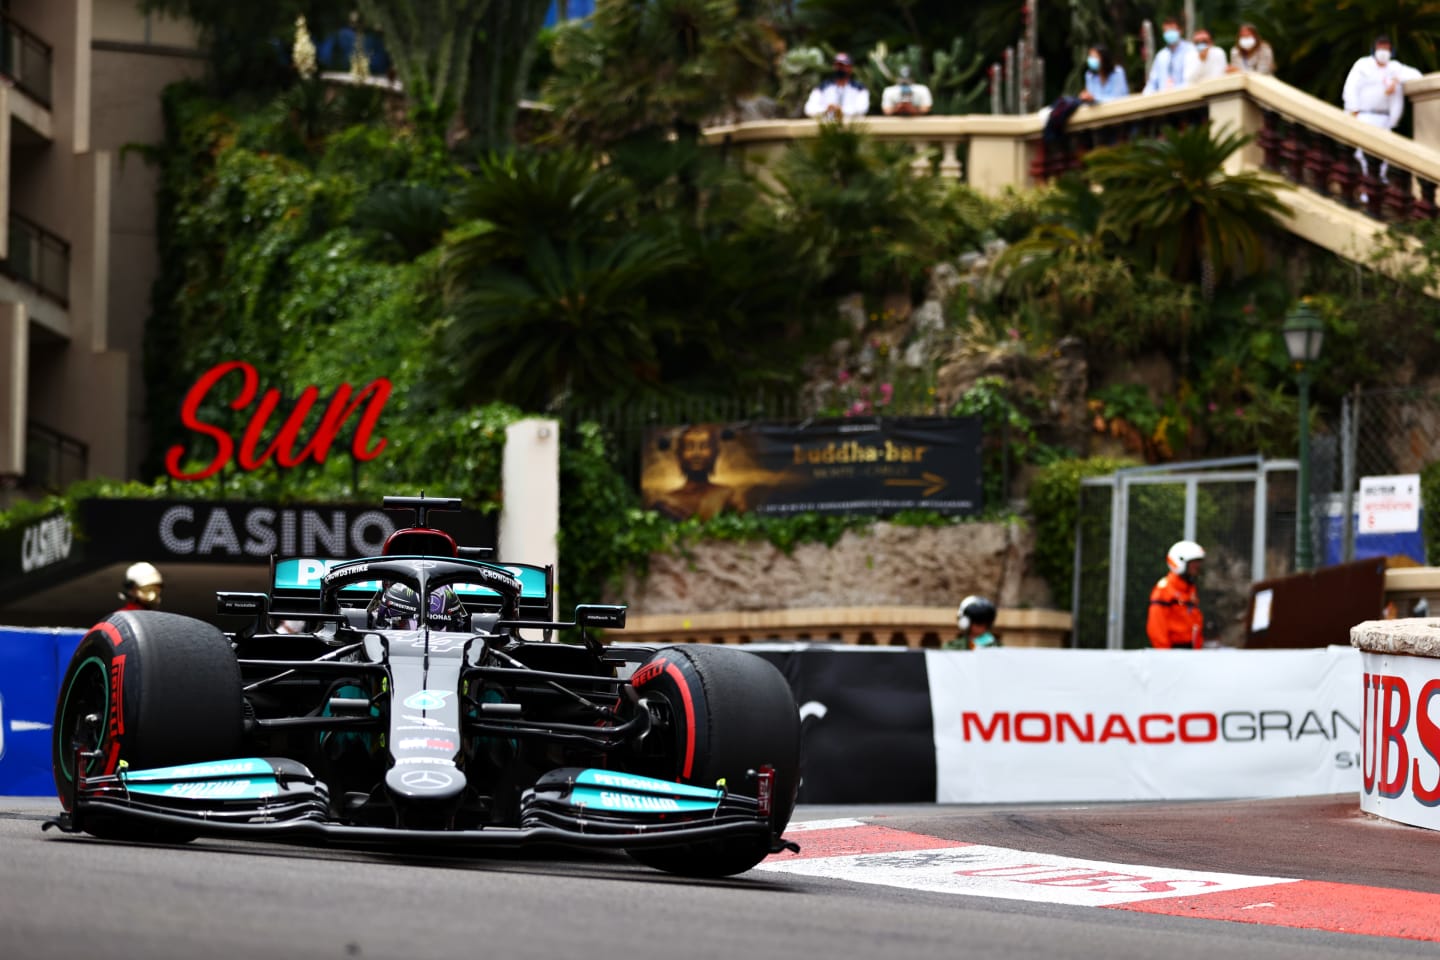 MONTE-CARLO, MONACO - MAY 22: Lewis Hamilton of Great Britain driving the (44) Mercedes AMG